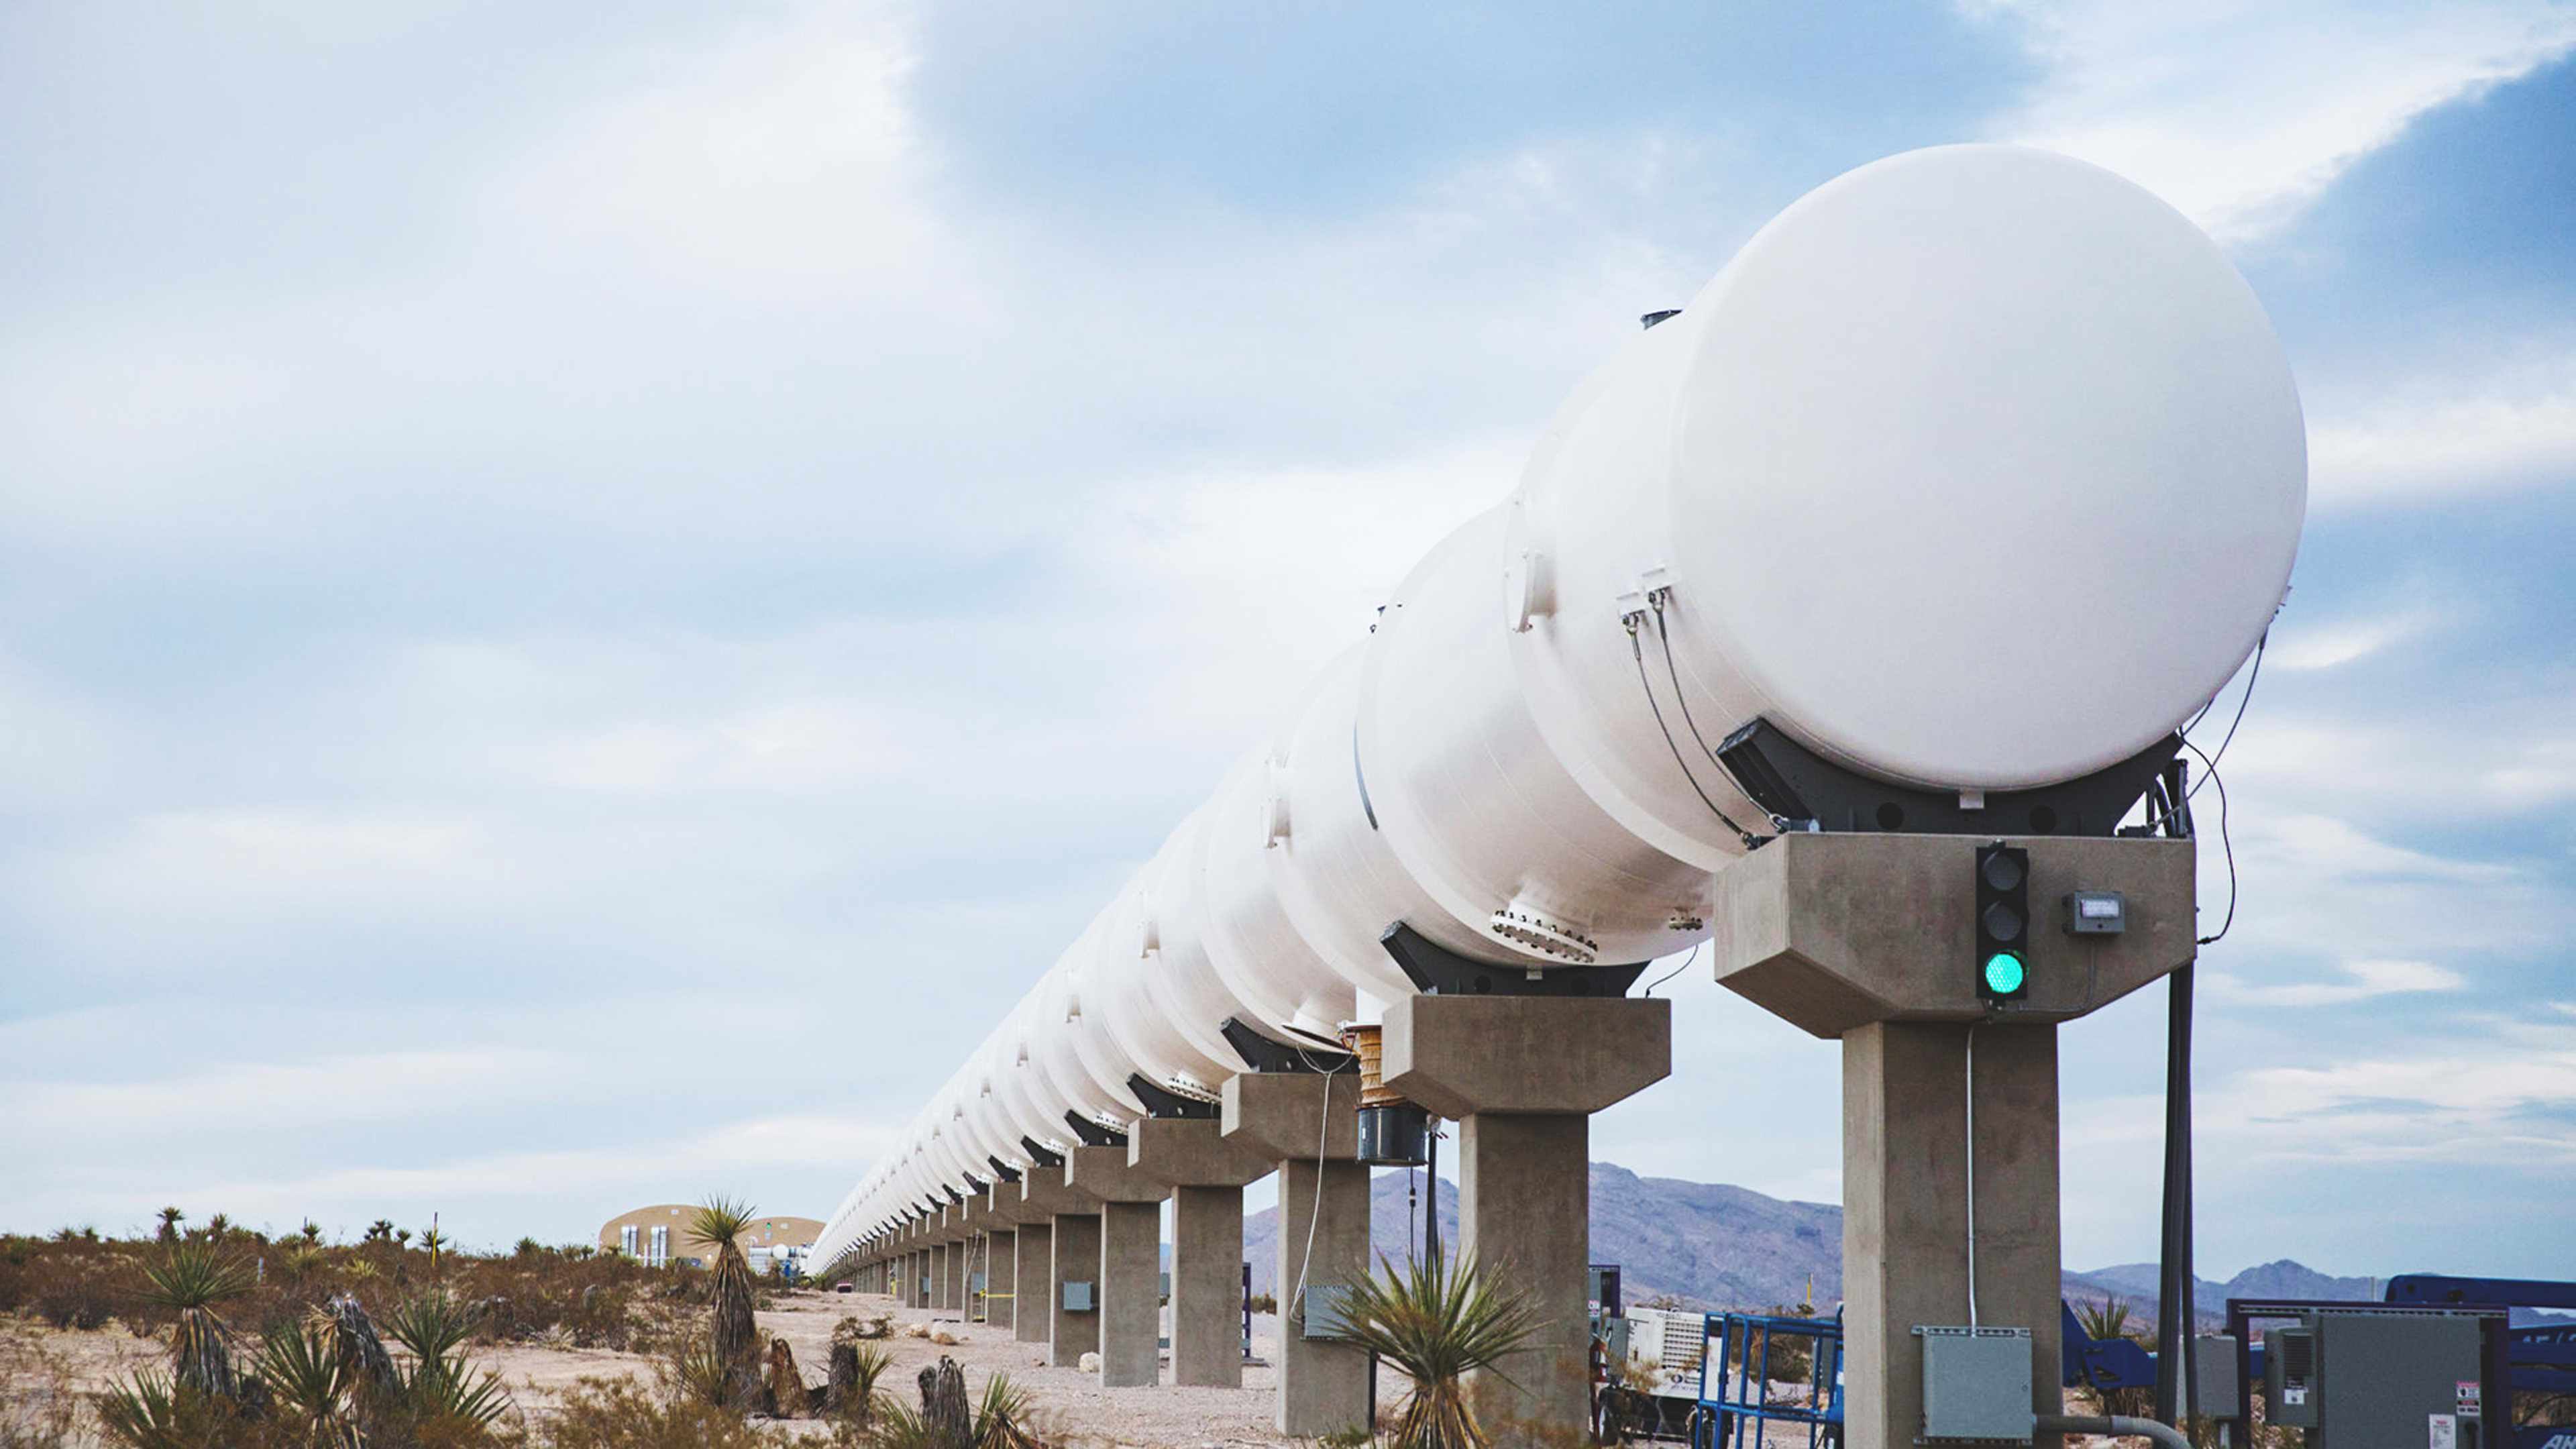 Richard Branson’s Virgin Hyperloop One is setting up a test track in India